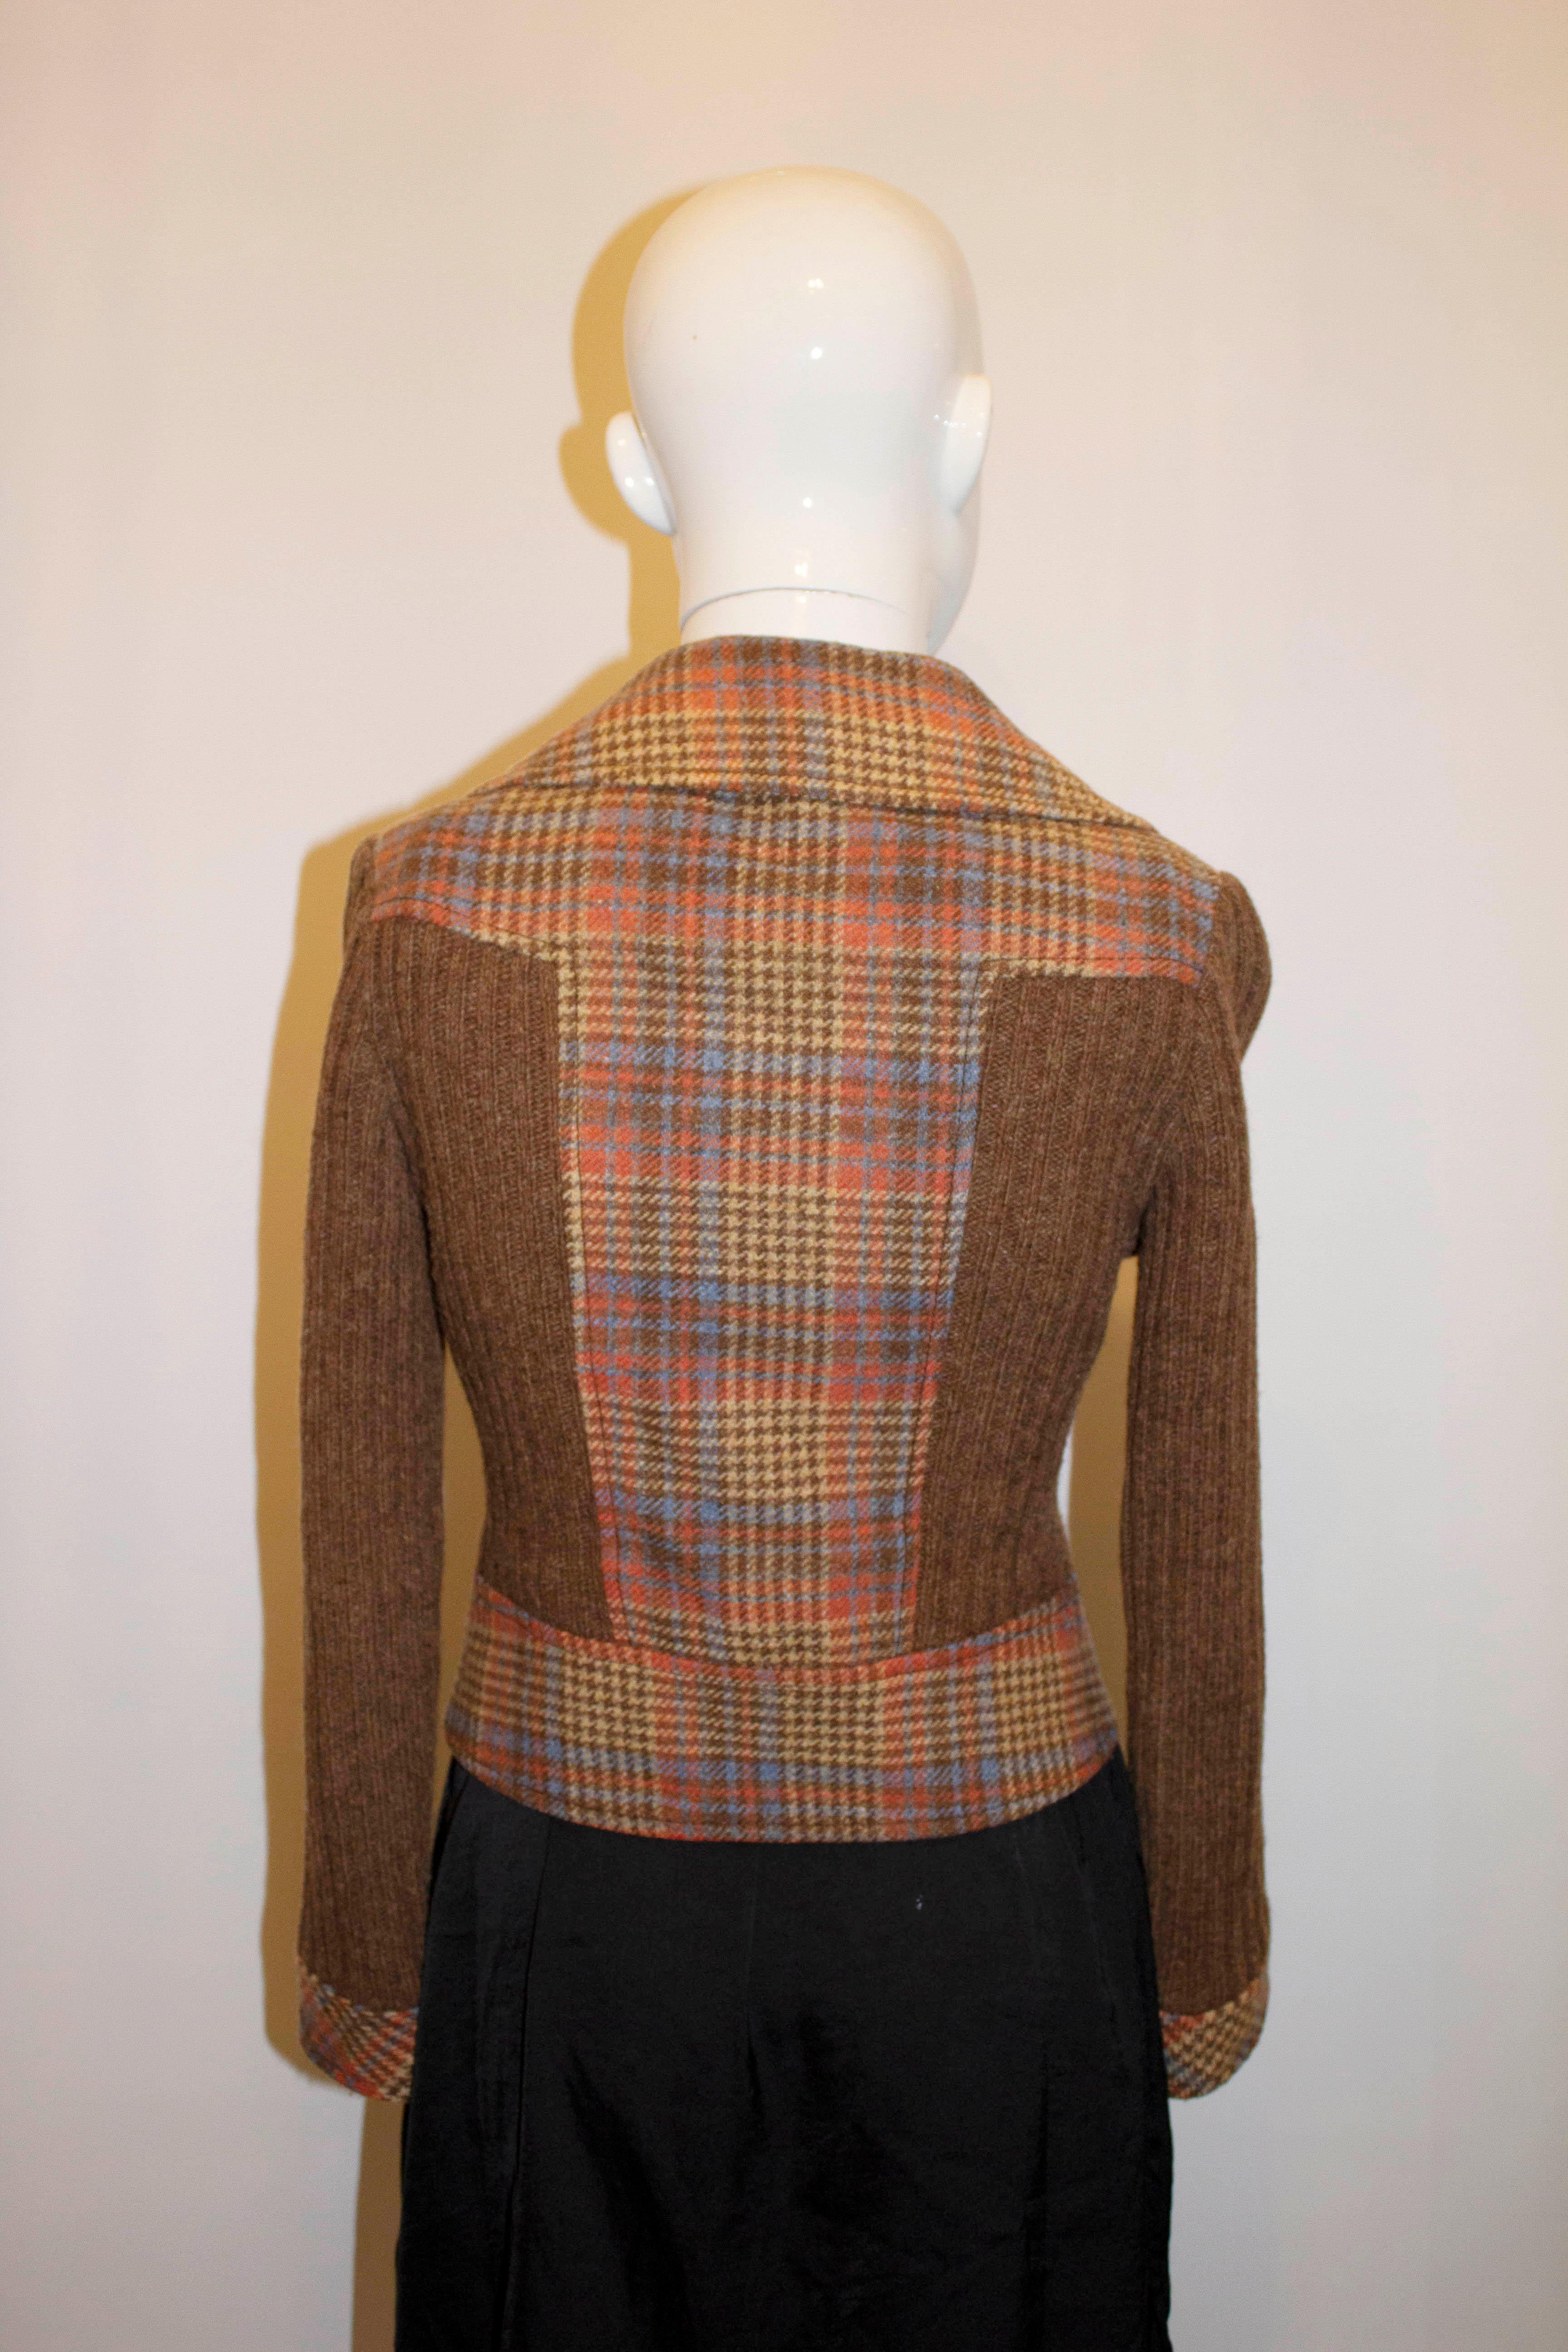 A fun vintage jacket from the 1970s. The wool jacket has a cut away collar, is double breasted with two columns of four buttons. The fabric is in a mix of red, yellow and brown check with knitted detail on the front, sleaves and part of the